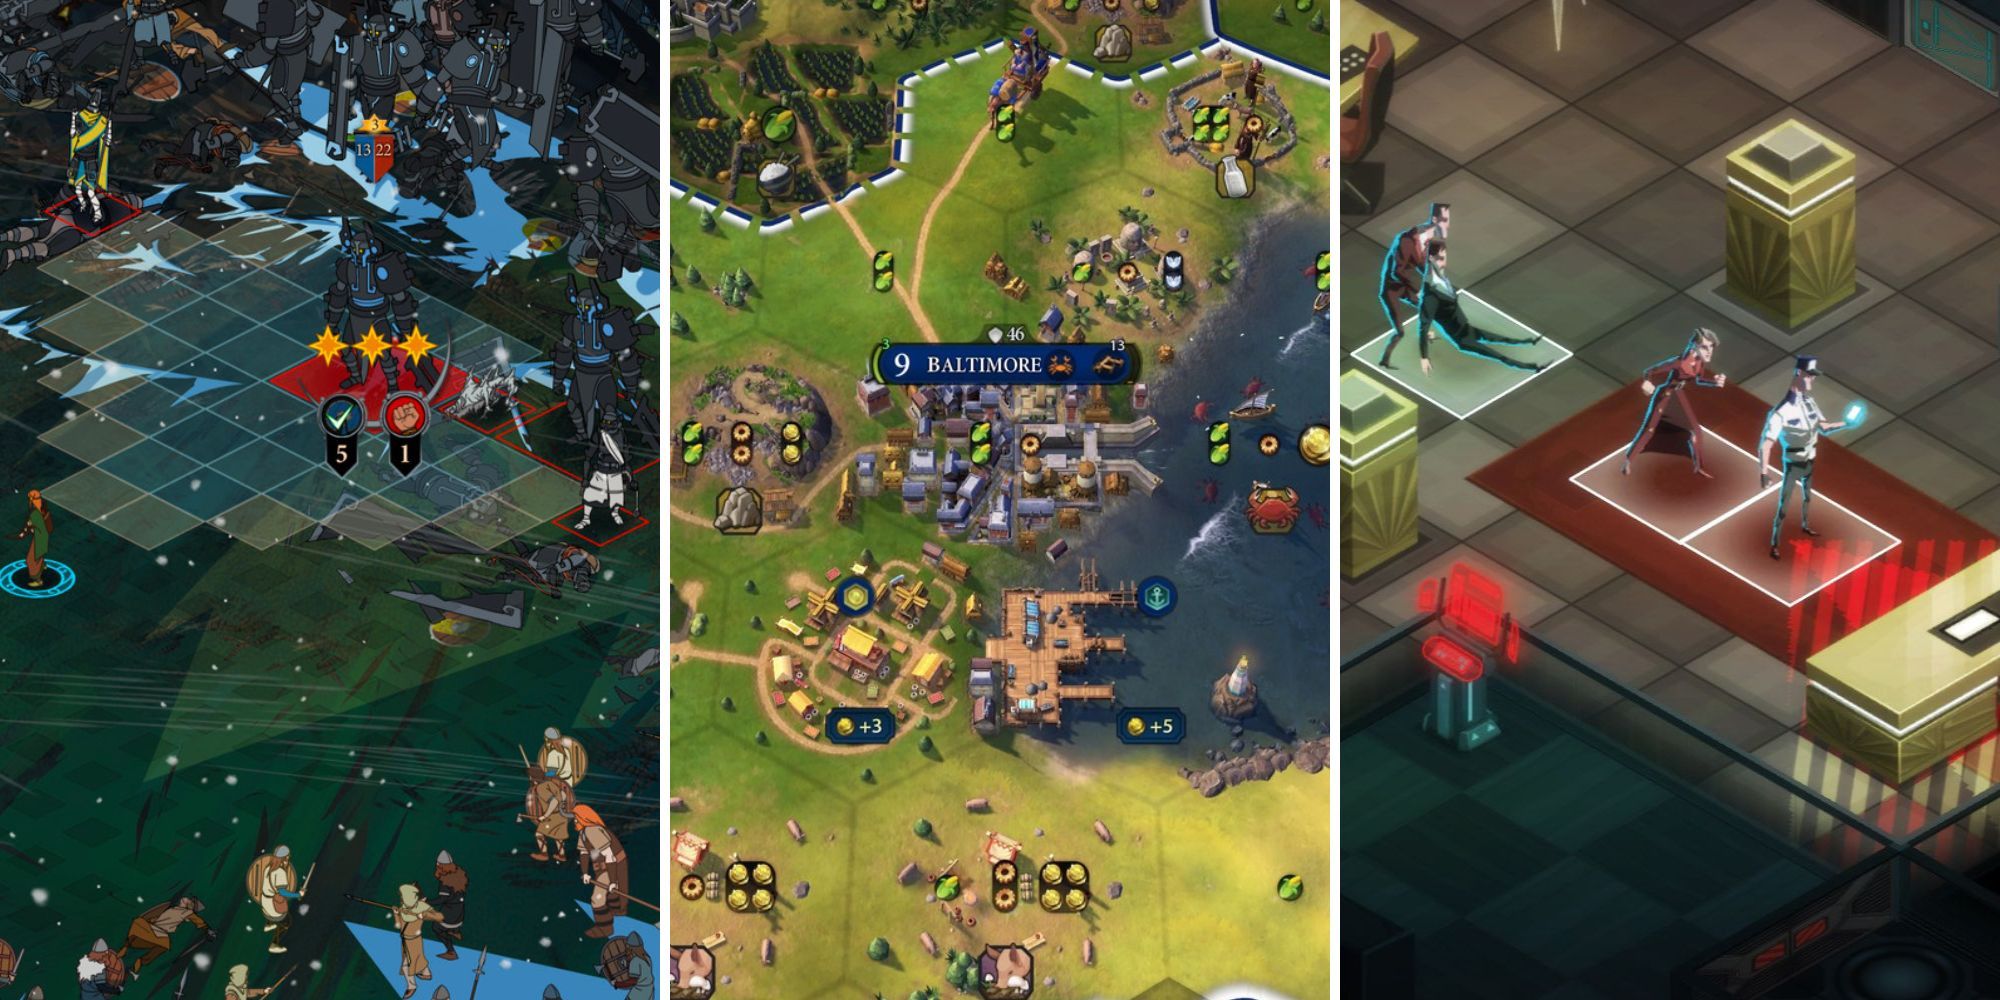 A grid of three grid-based strategy games The Banner Saga 3, Civilization 6, and Invisible Inc